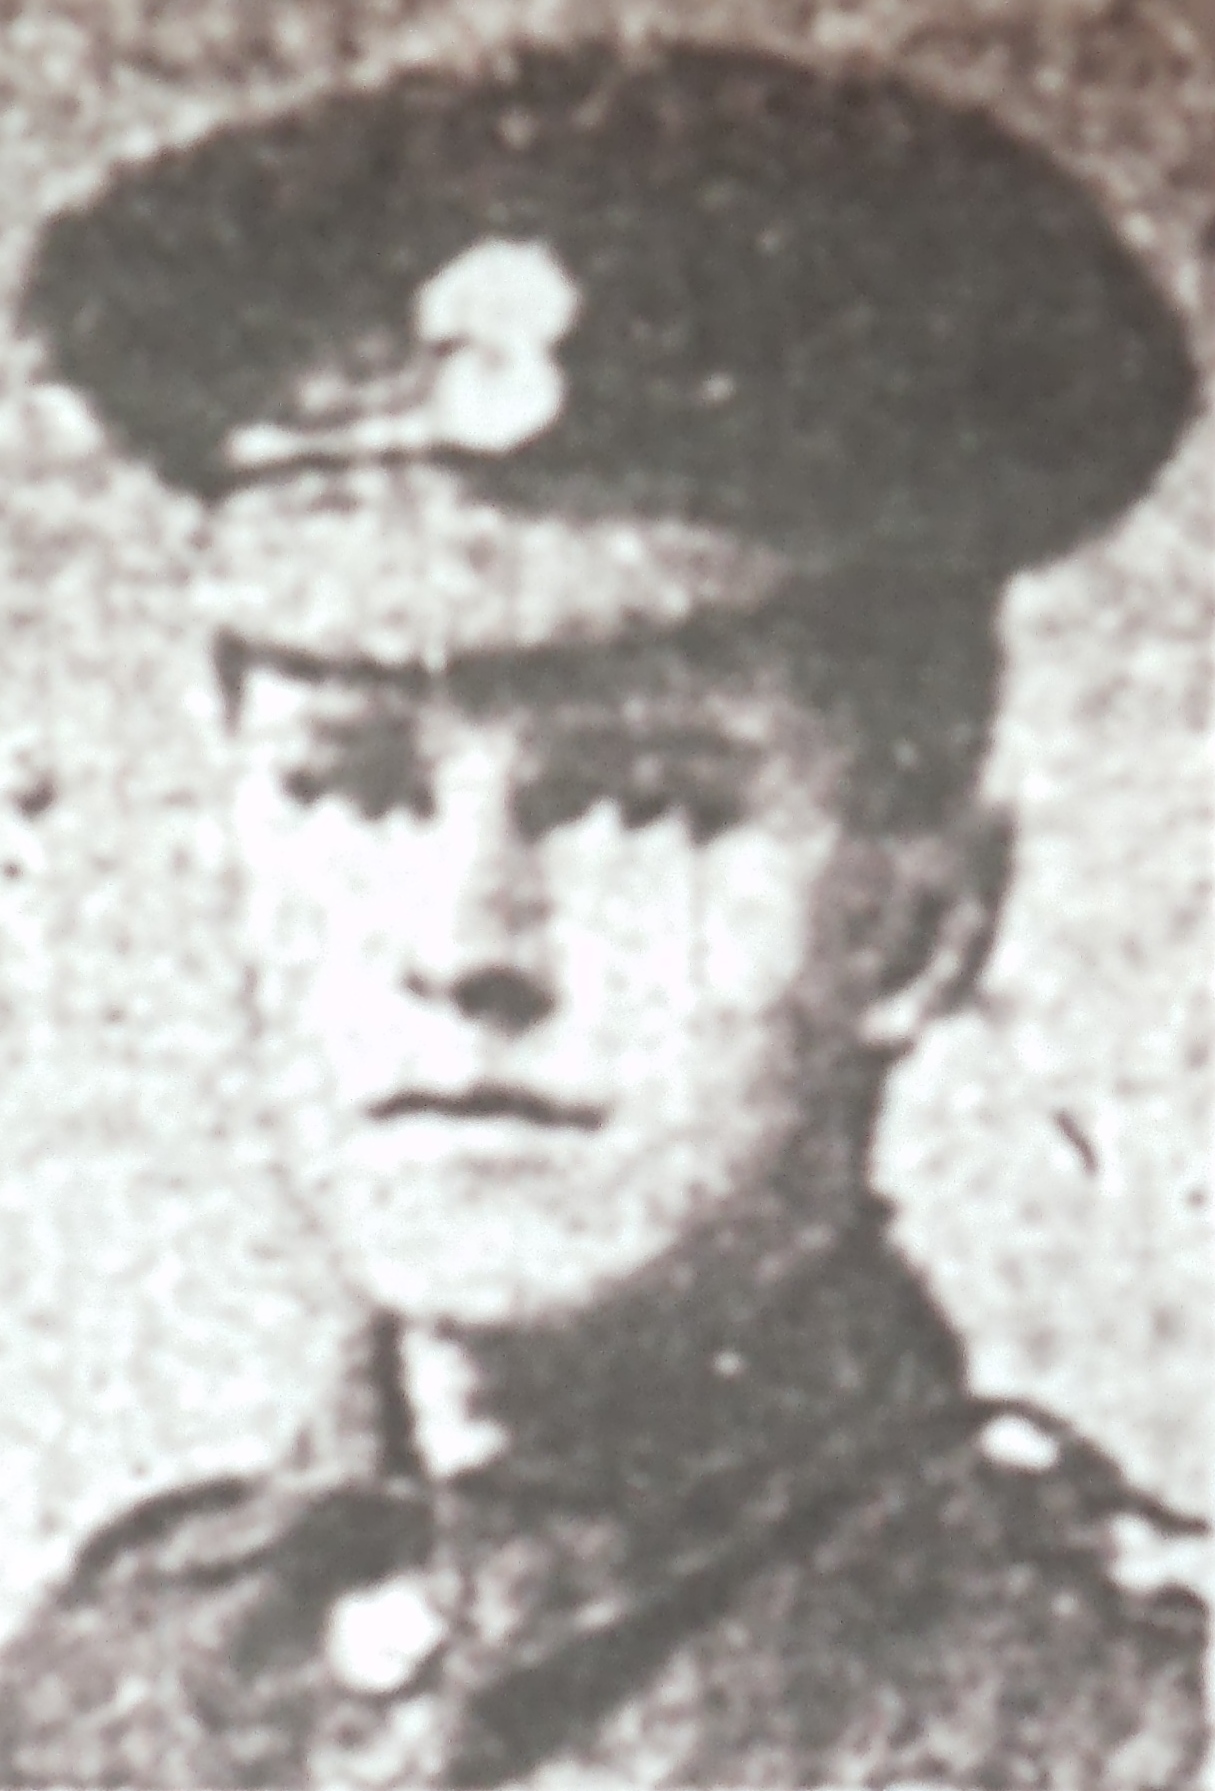 black and white image of henry hackett doggett's face and shoulders. he is wearing his army uniform including a cap